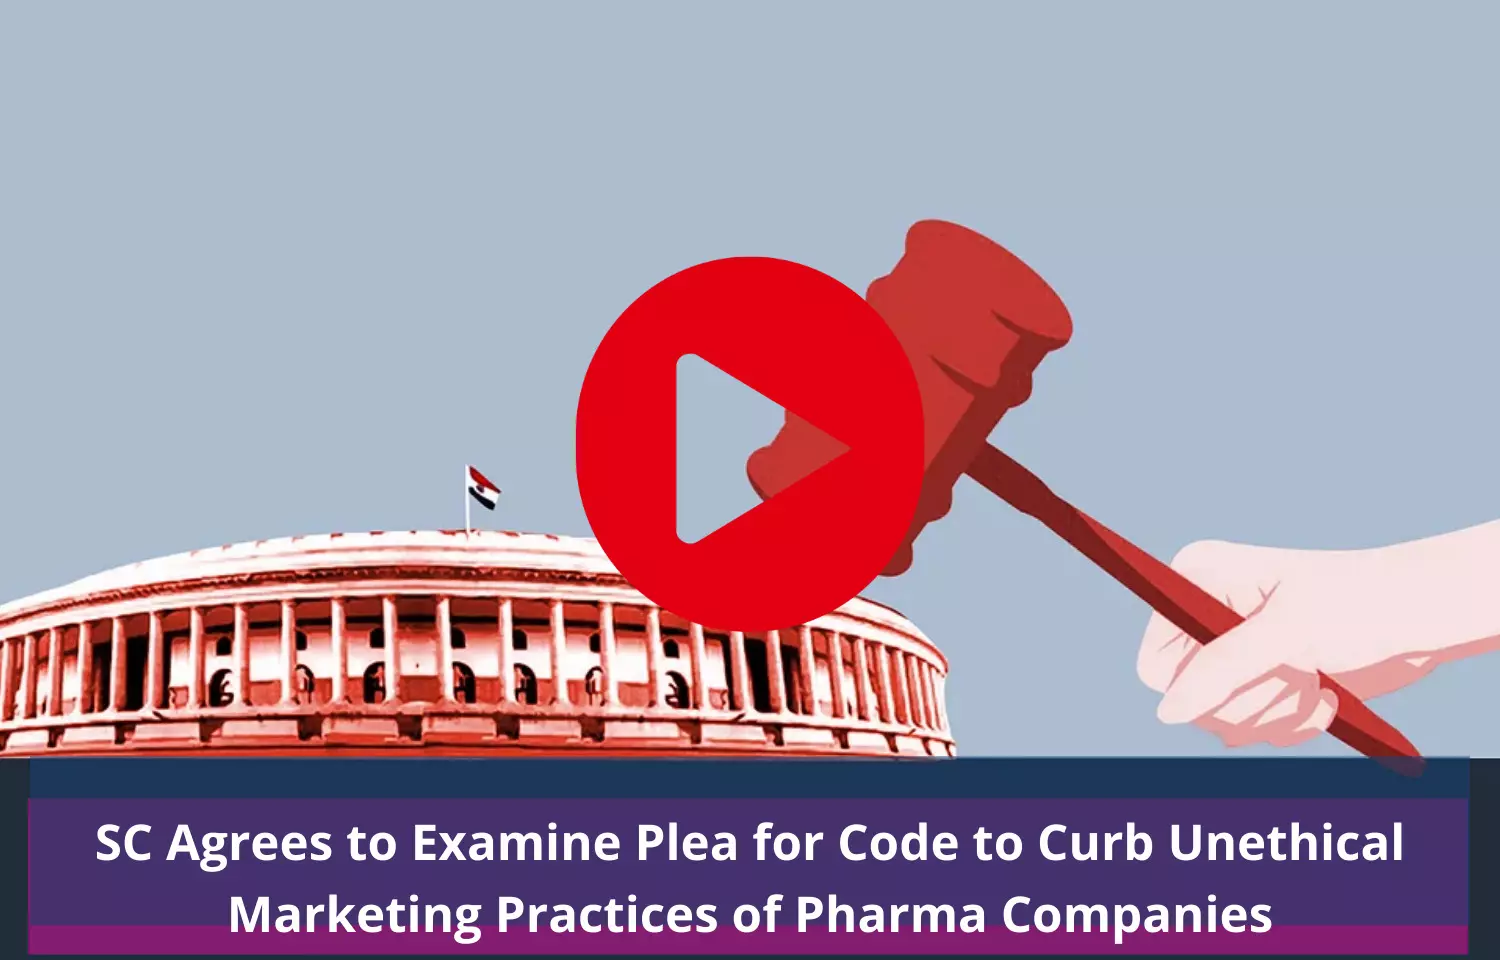 SC Agrees to Examine Plea for Code to Curb Unethical Marketing Practices of Pharma Companies